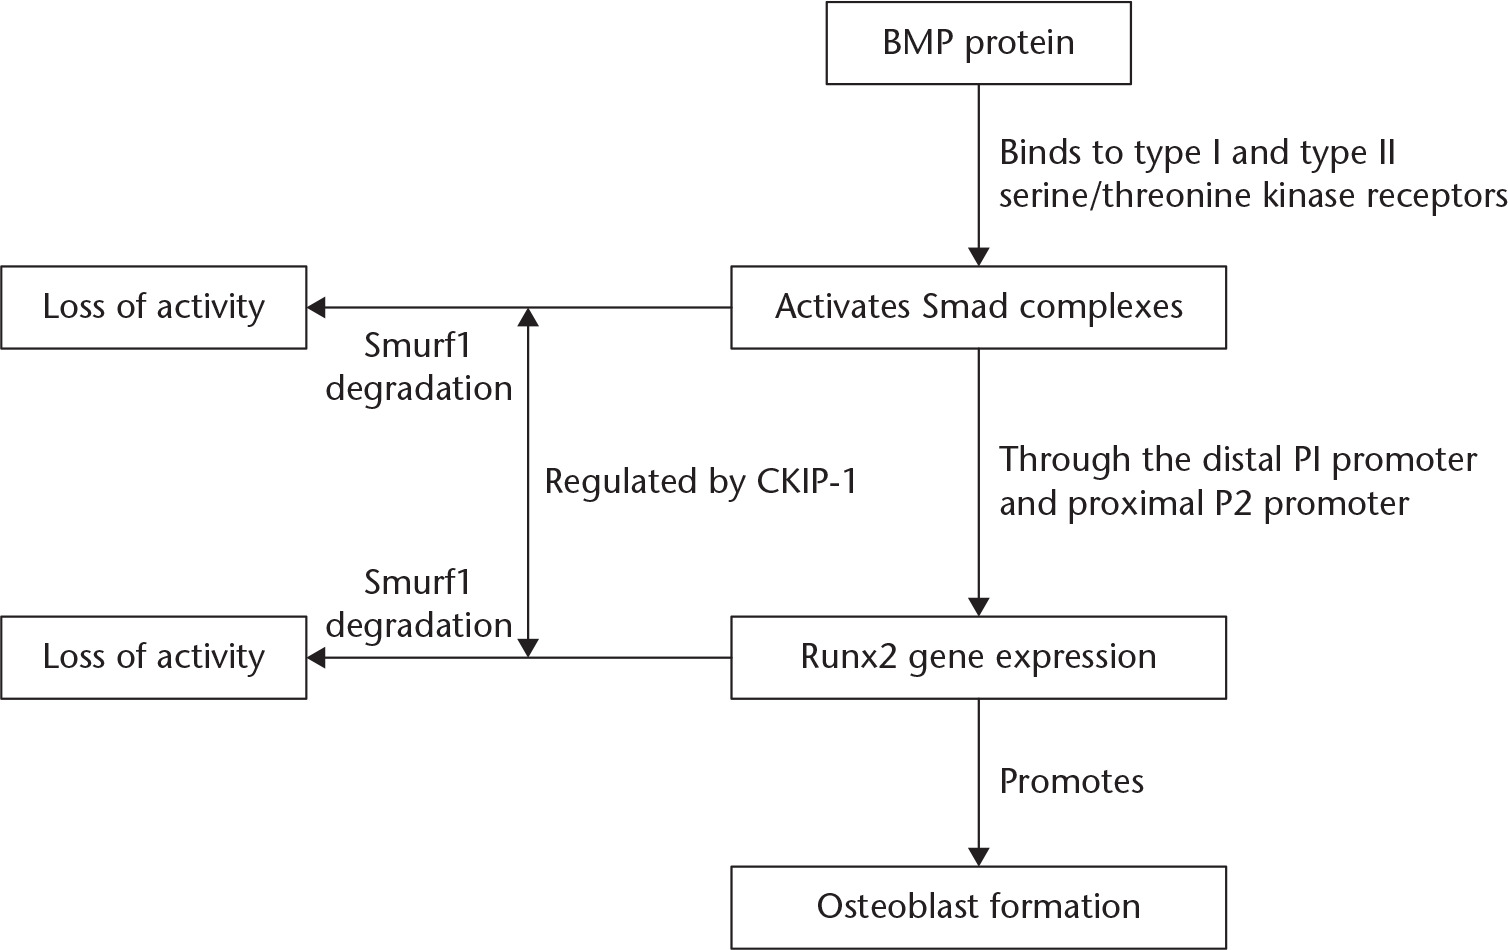 Fig. 2 
          The mechanism of action of CKIP-1 in regulating bone formation through the BMP pathway. BMP, Bone morphogenetic protein; Smurf1, Smad ubiquitination regulatory factor 1; CKIP-1, Casein kinase 2-interacting protein-1; RUNX2, Runt-related gene 2.
        